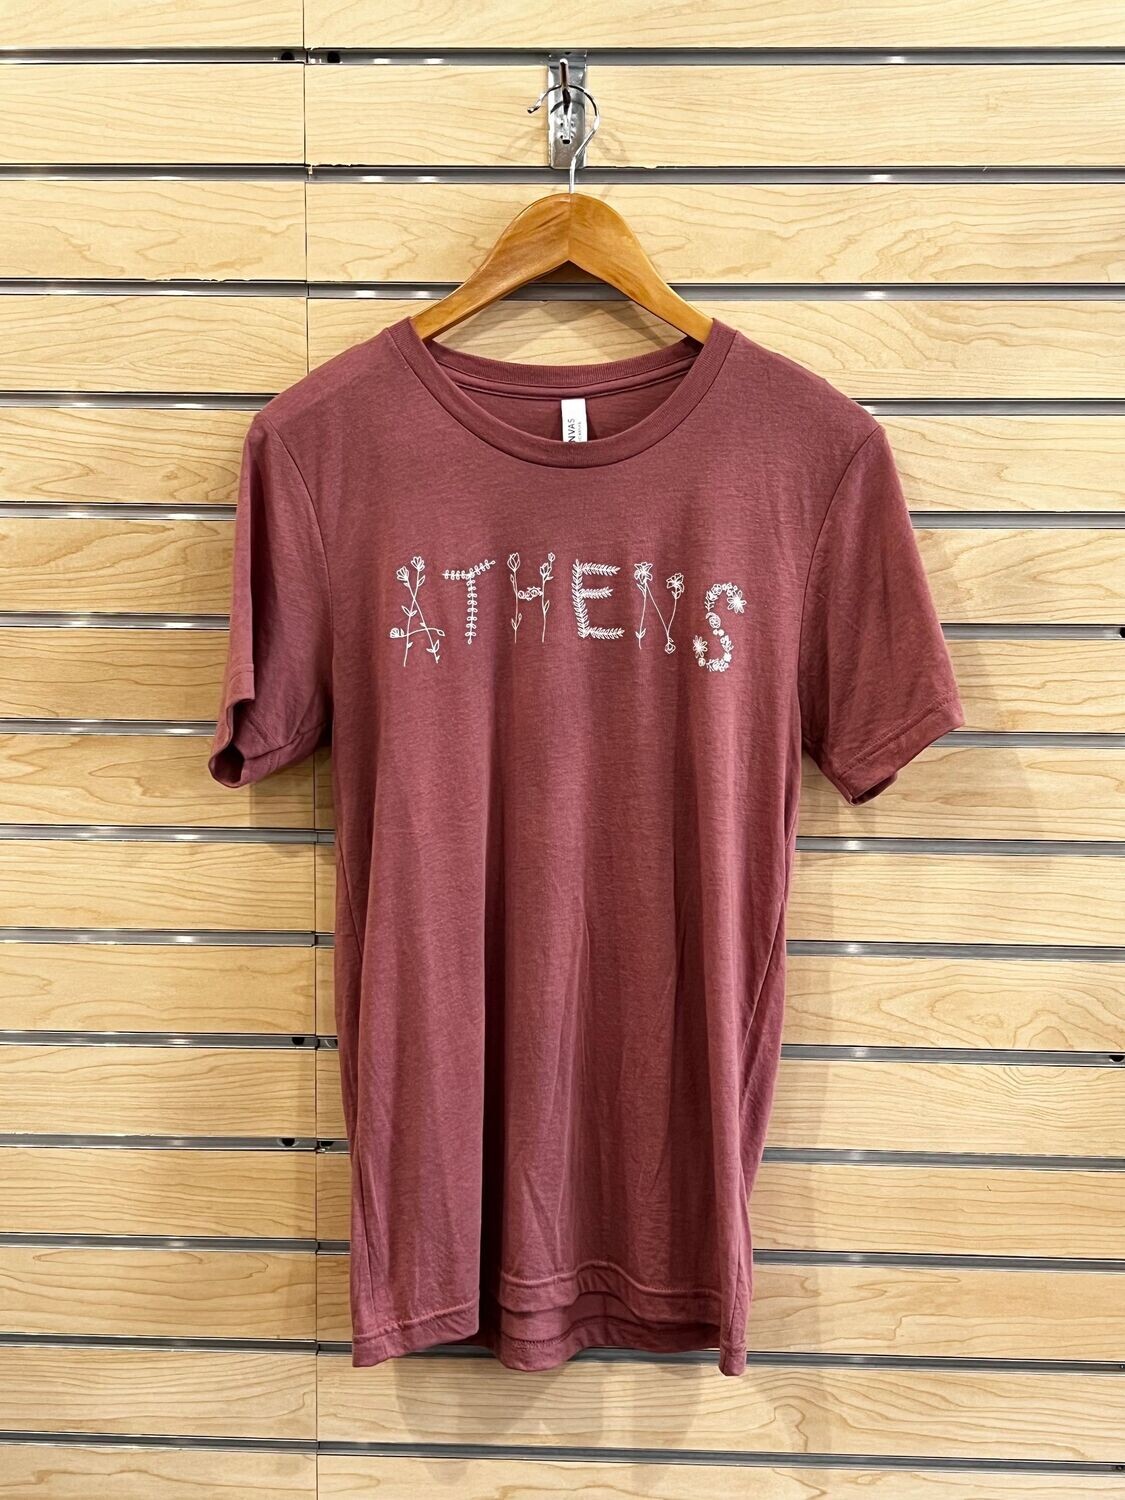 Athens Flowers T Shirt